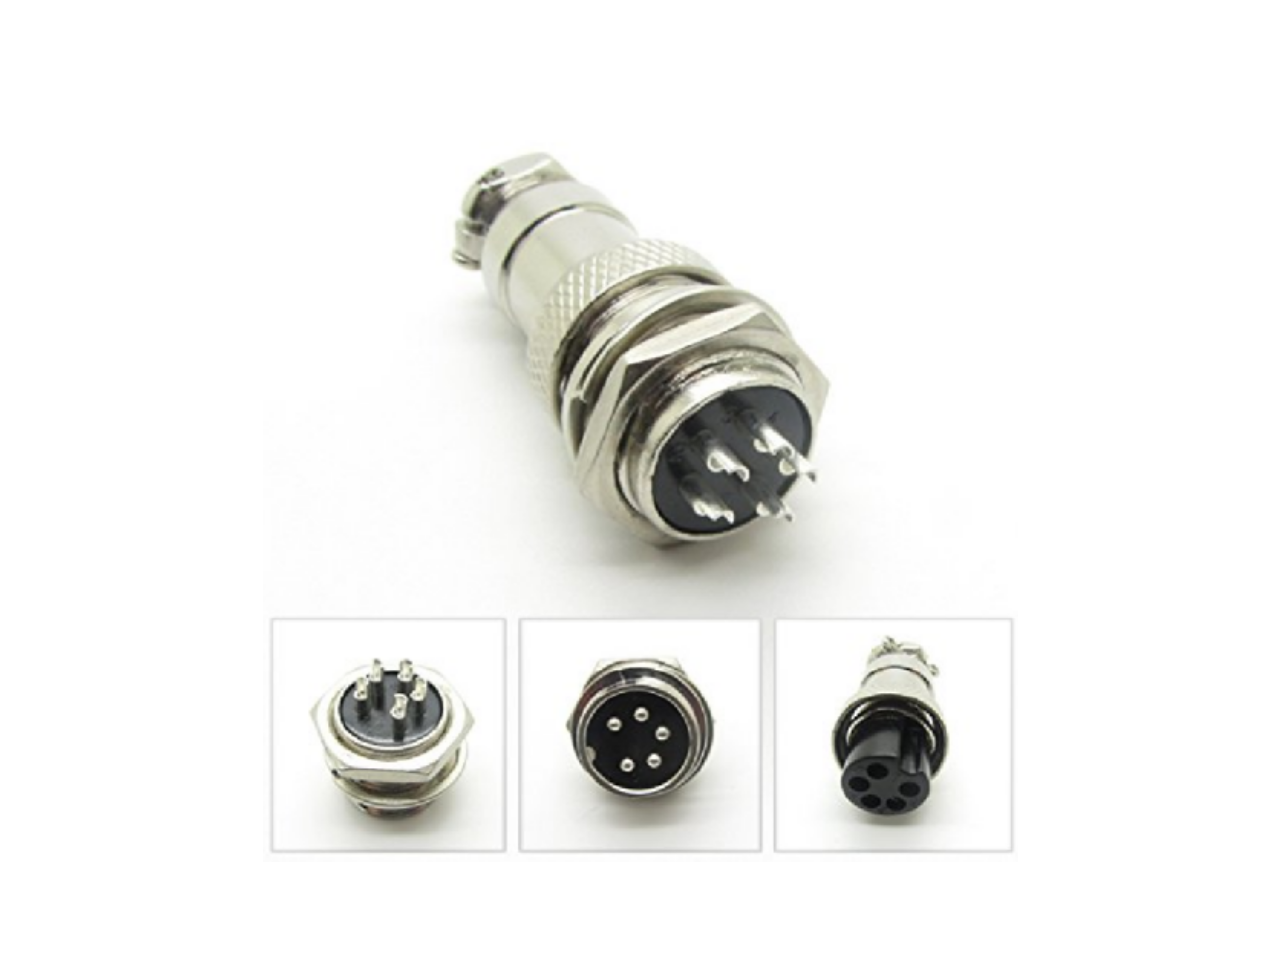 Details about   5x Aviation Plug Male & Female Wire Panel Metal Connector 16mm 4 Pin GX16-4  &ZZ